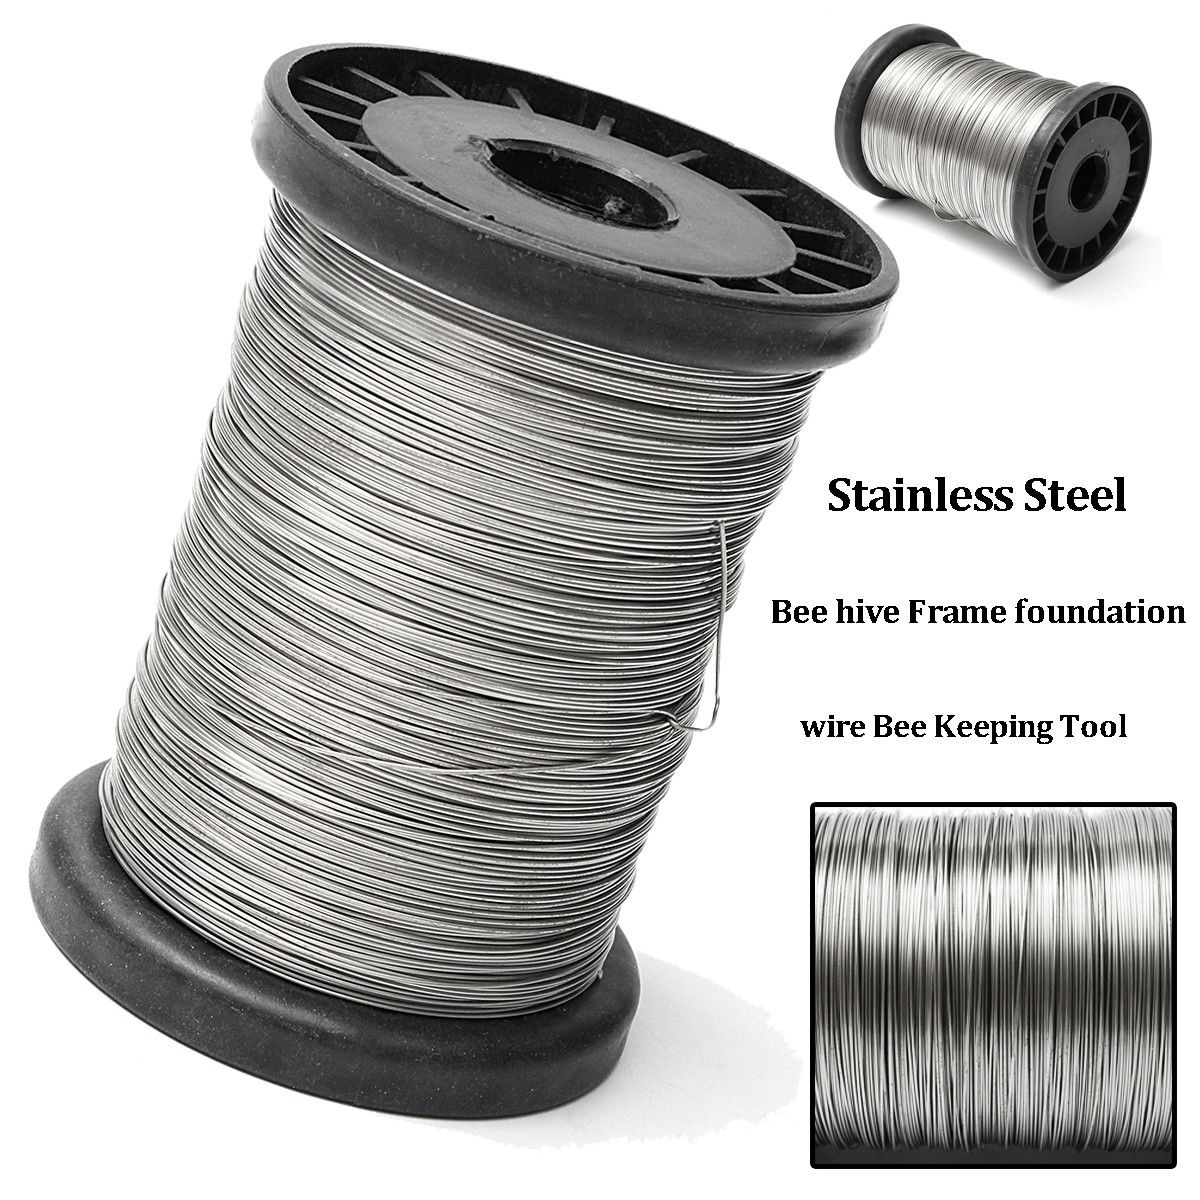 500g-05mm-Stainless-Steel-Wire-Bee-Hive-Frame-Foundation-Wire-1112570